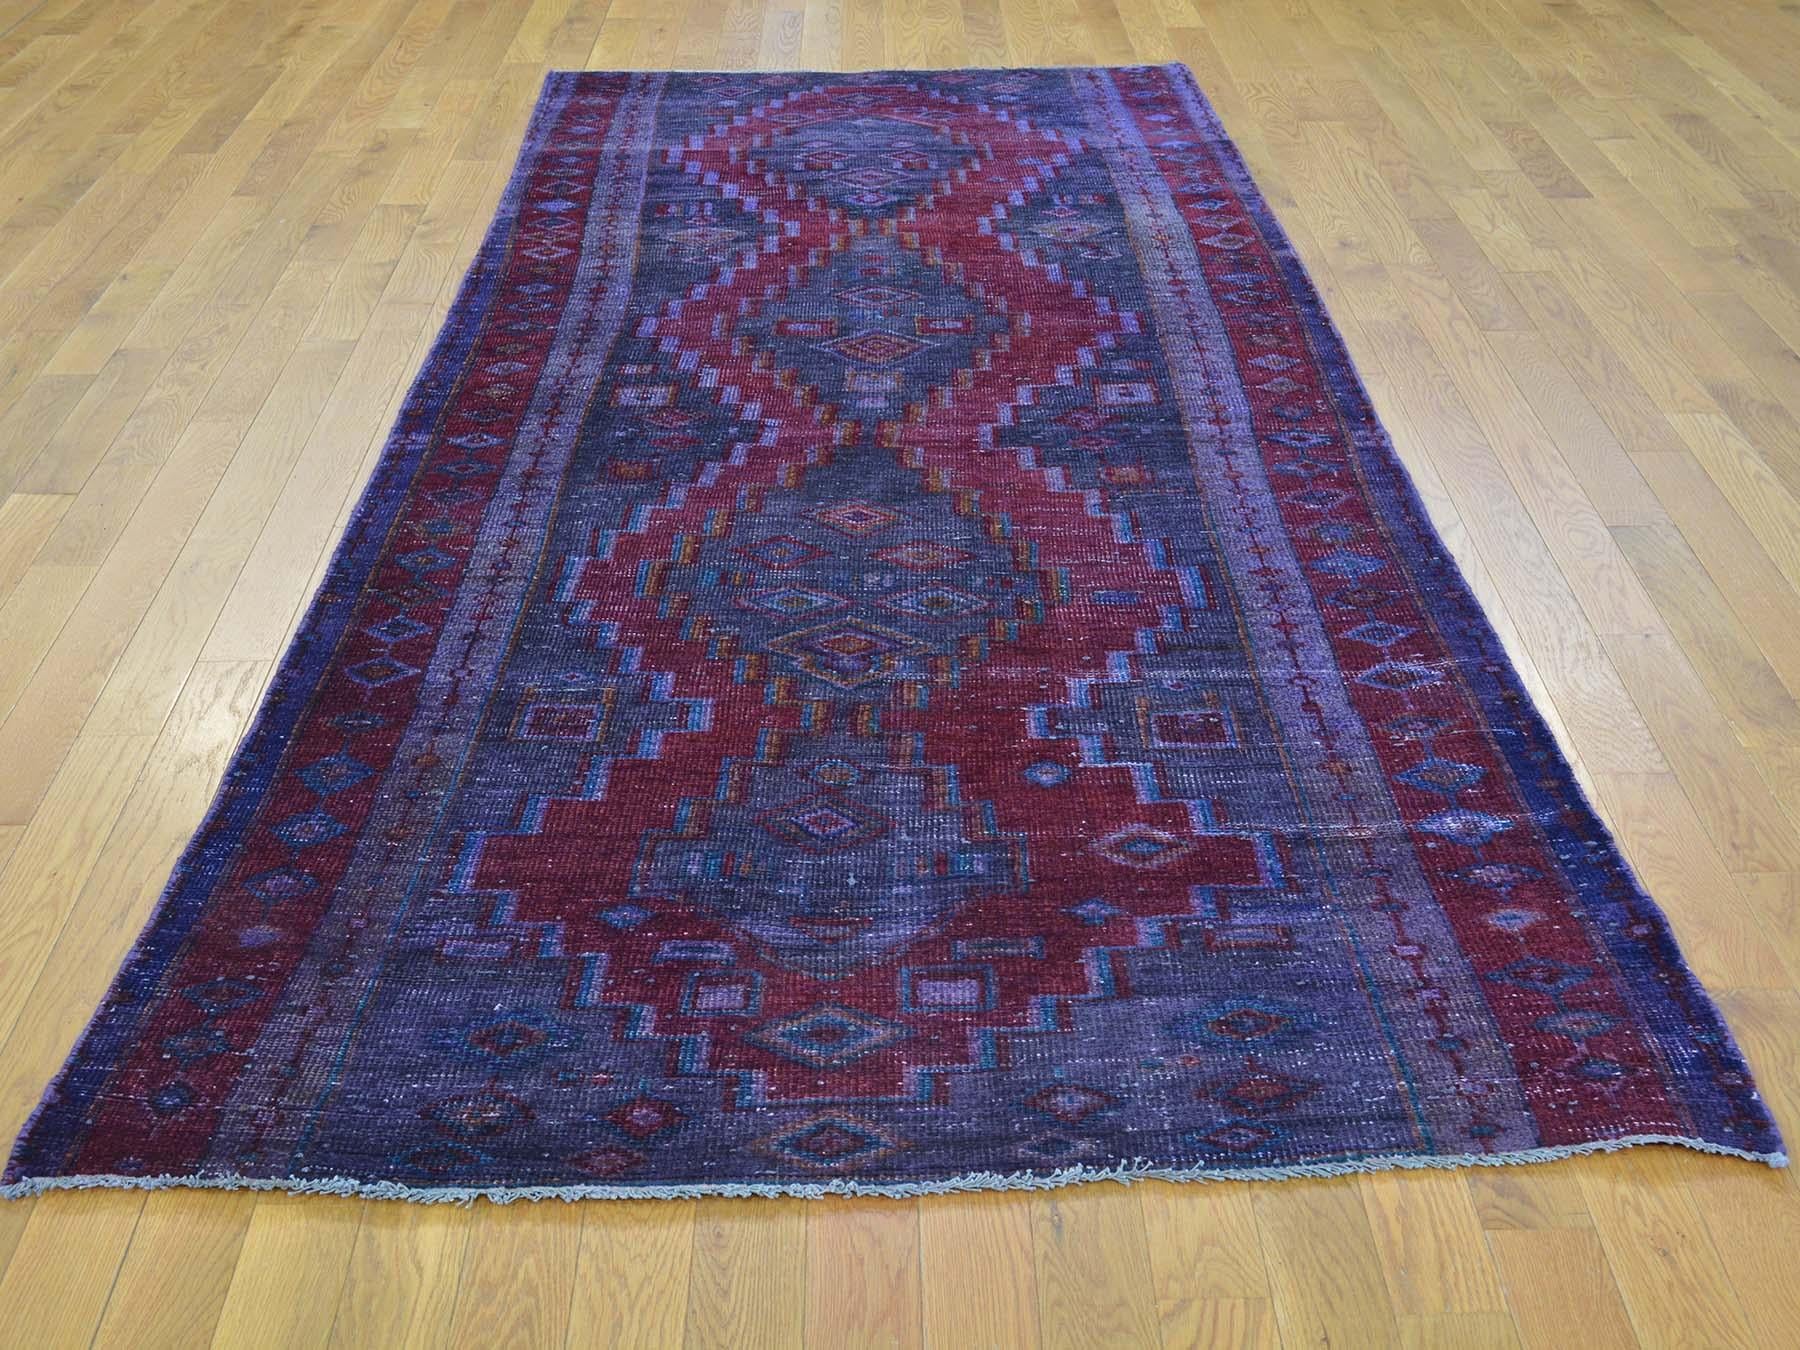 This is a truly genuine one-of-a-kind semi antique Persian Hamadan overdyed vintage wide runner rug. It has been knotted for months and months in the centuries-old Persian weaving craftsmanship techniques by expert artisans.

Primary materials: